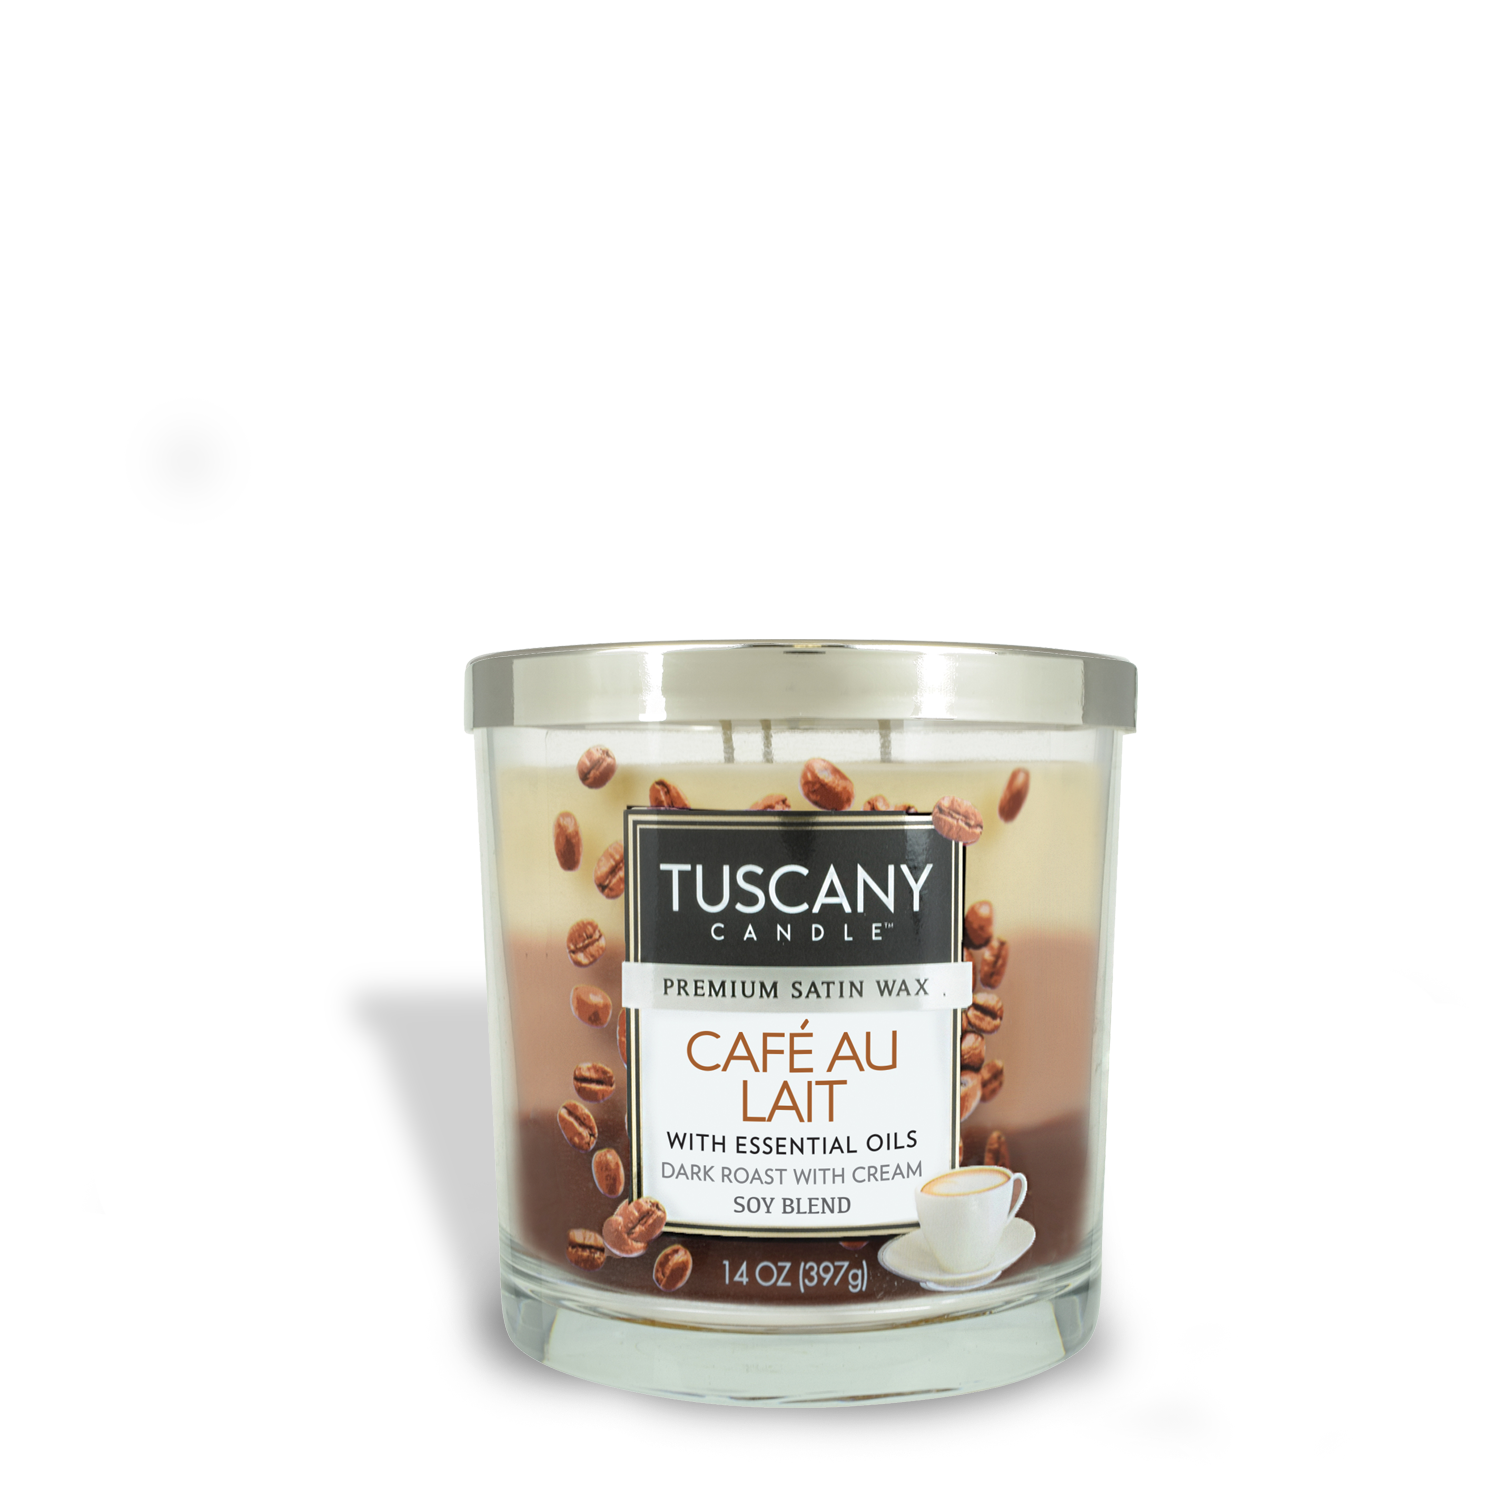 Tuscany Café Au Lait Long-Lasting Scented Jar Candle (14 oz) that will caffeinate your senses with its rich coffee aroma.